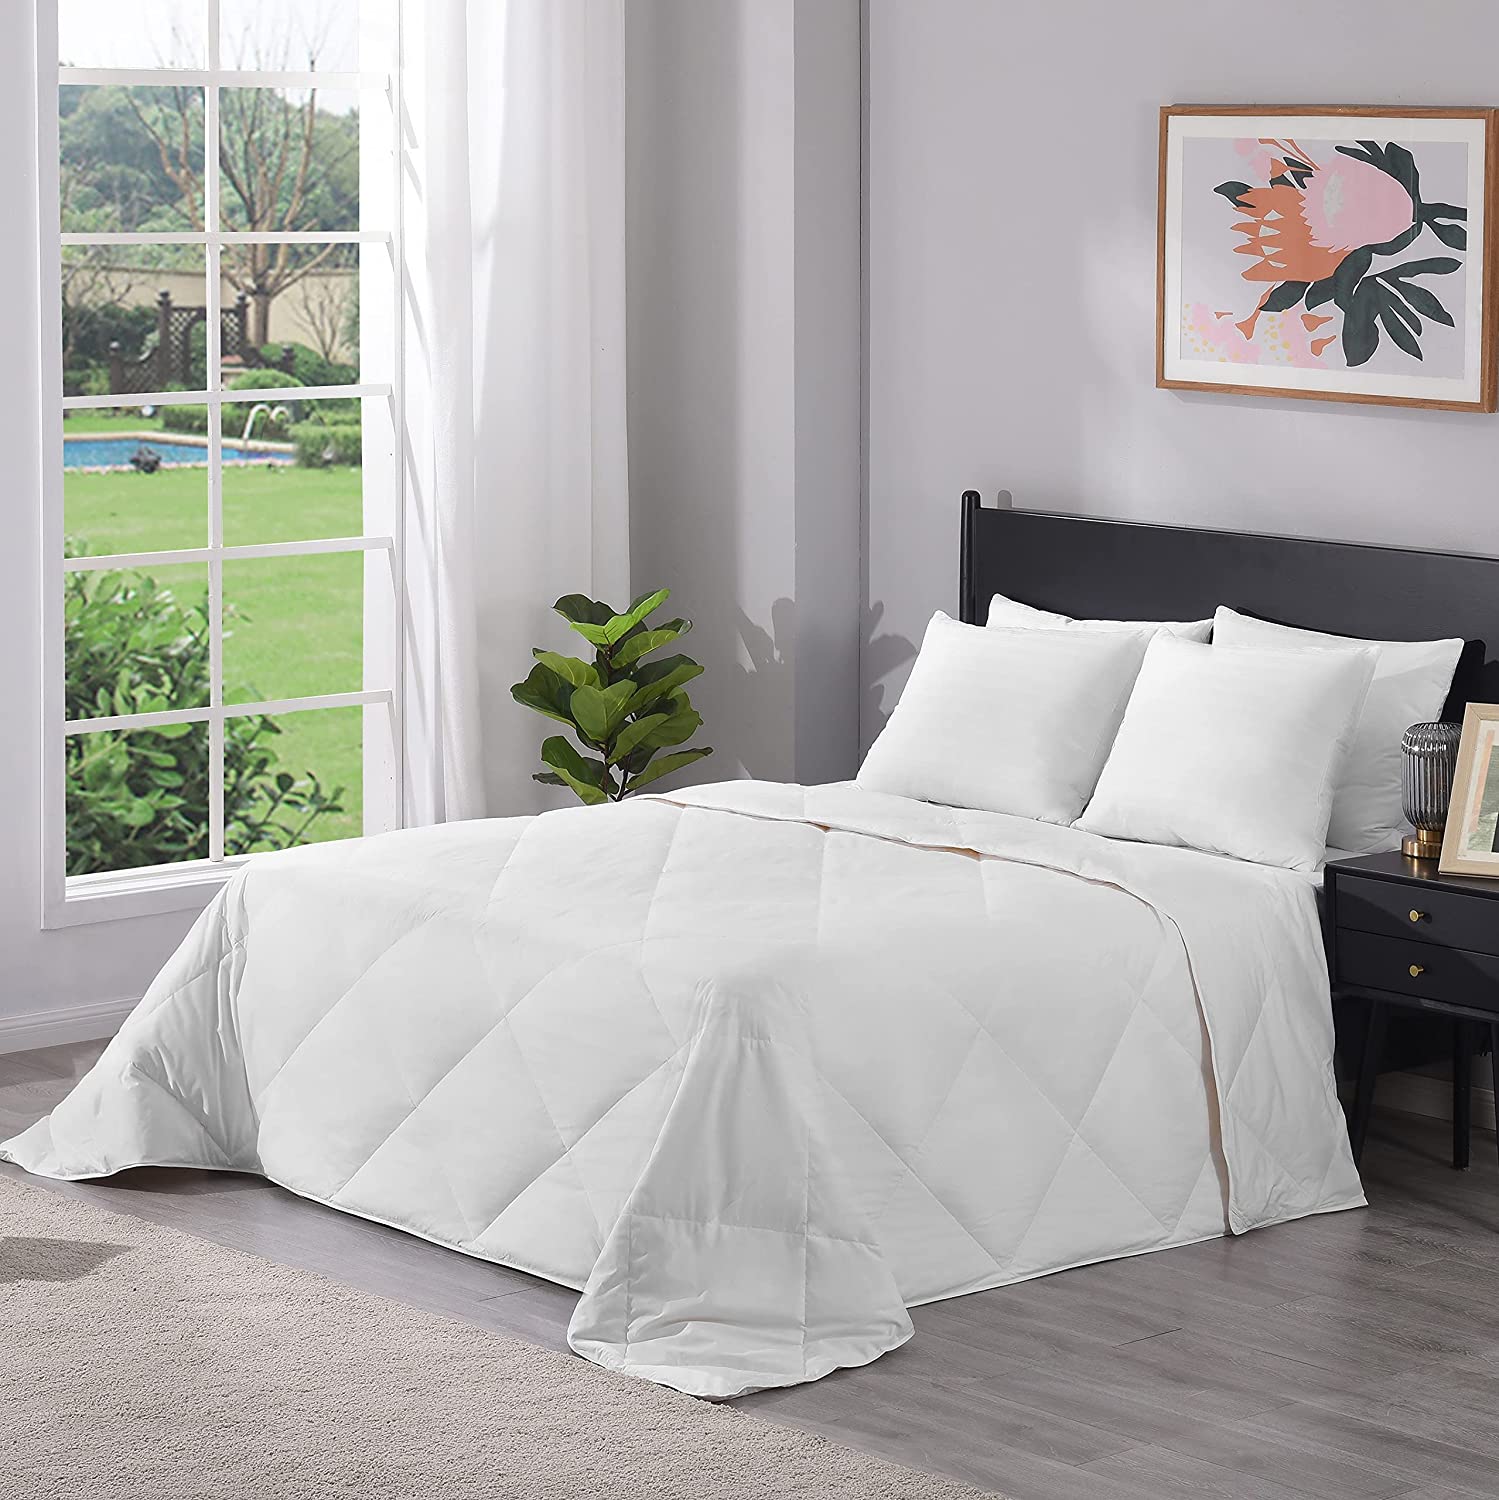 Price:$39.99  Lightweight Feather Down Comforter with Corner Tabs for Summer - 100% Cotton Cover White Duvet Insert King Size 104 x 88 : Home & Kitchen